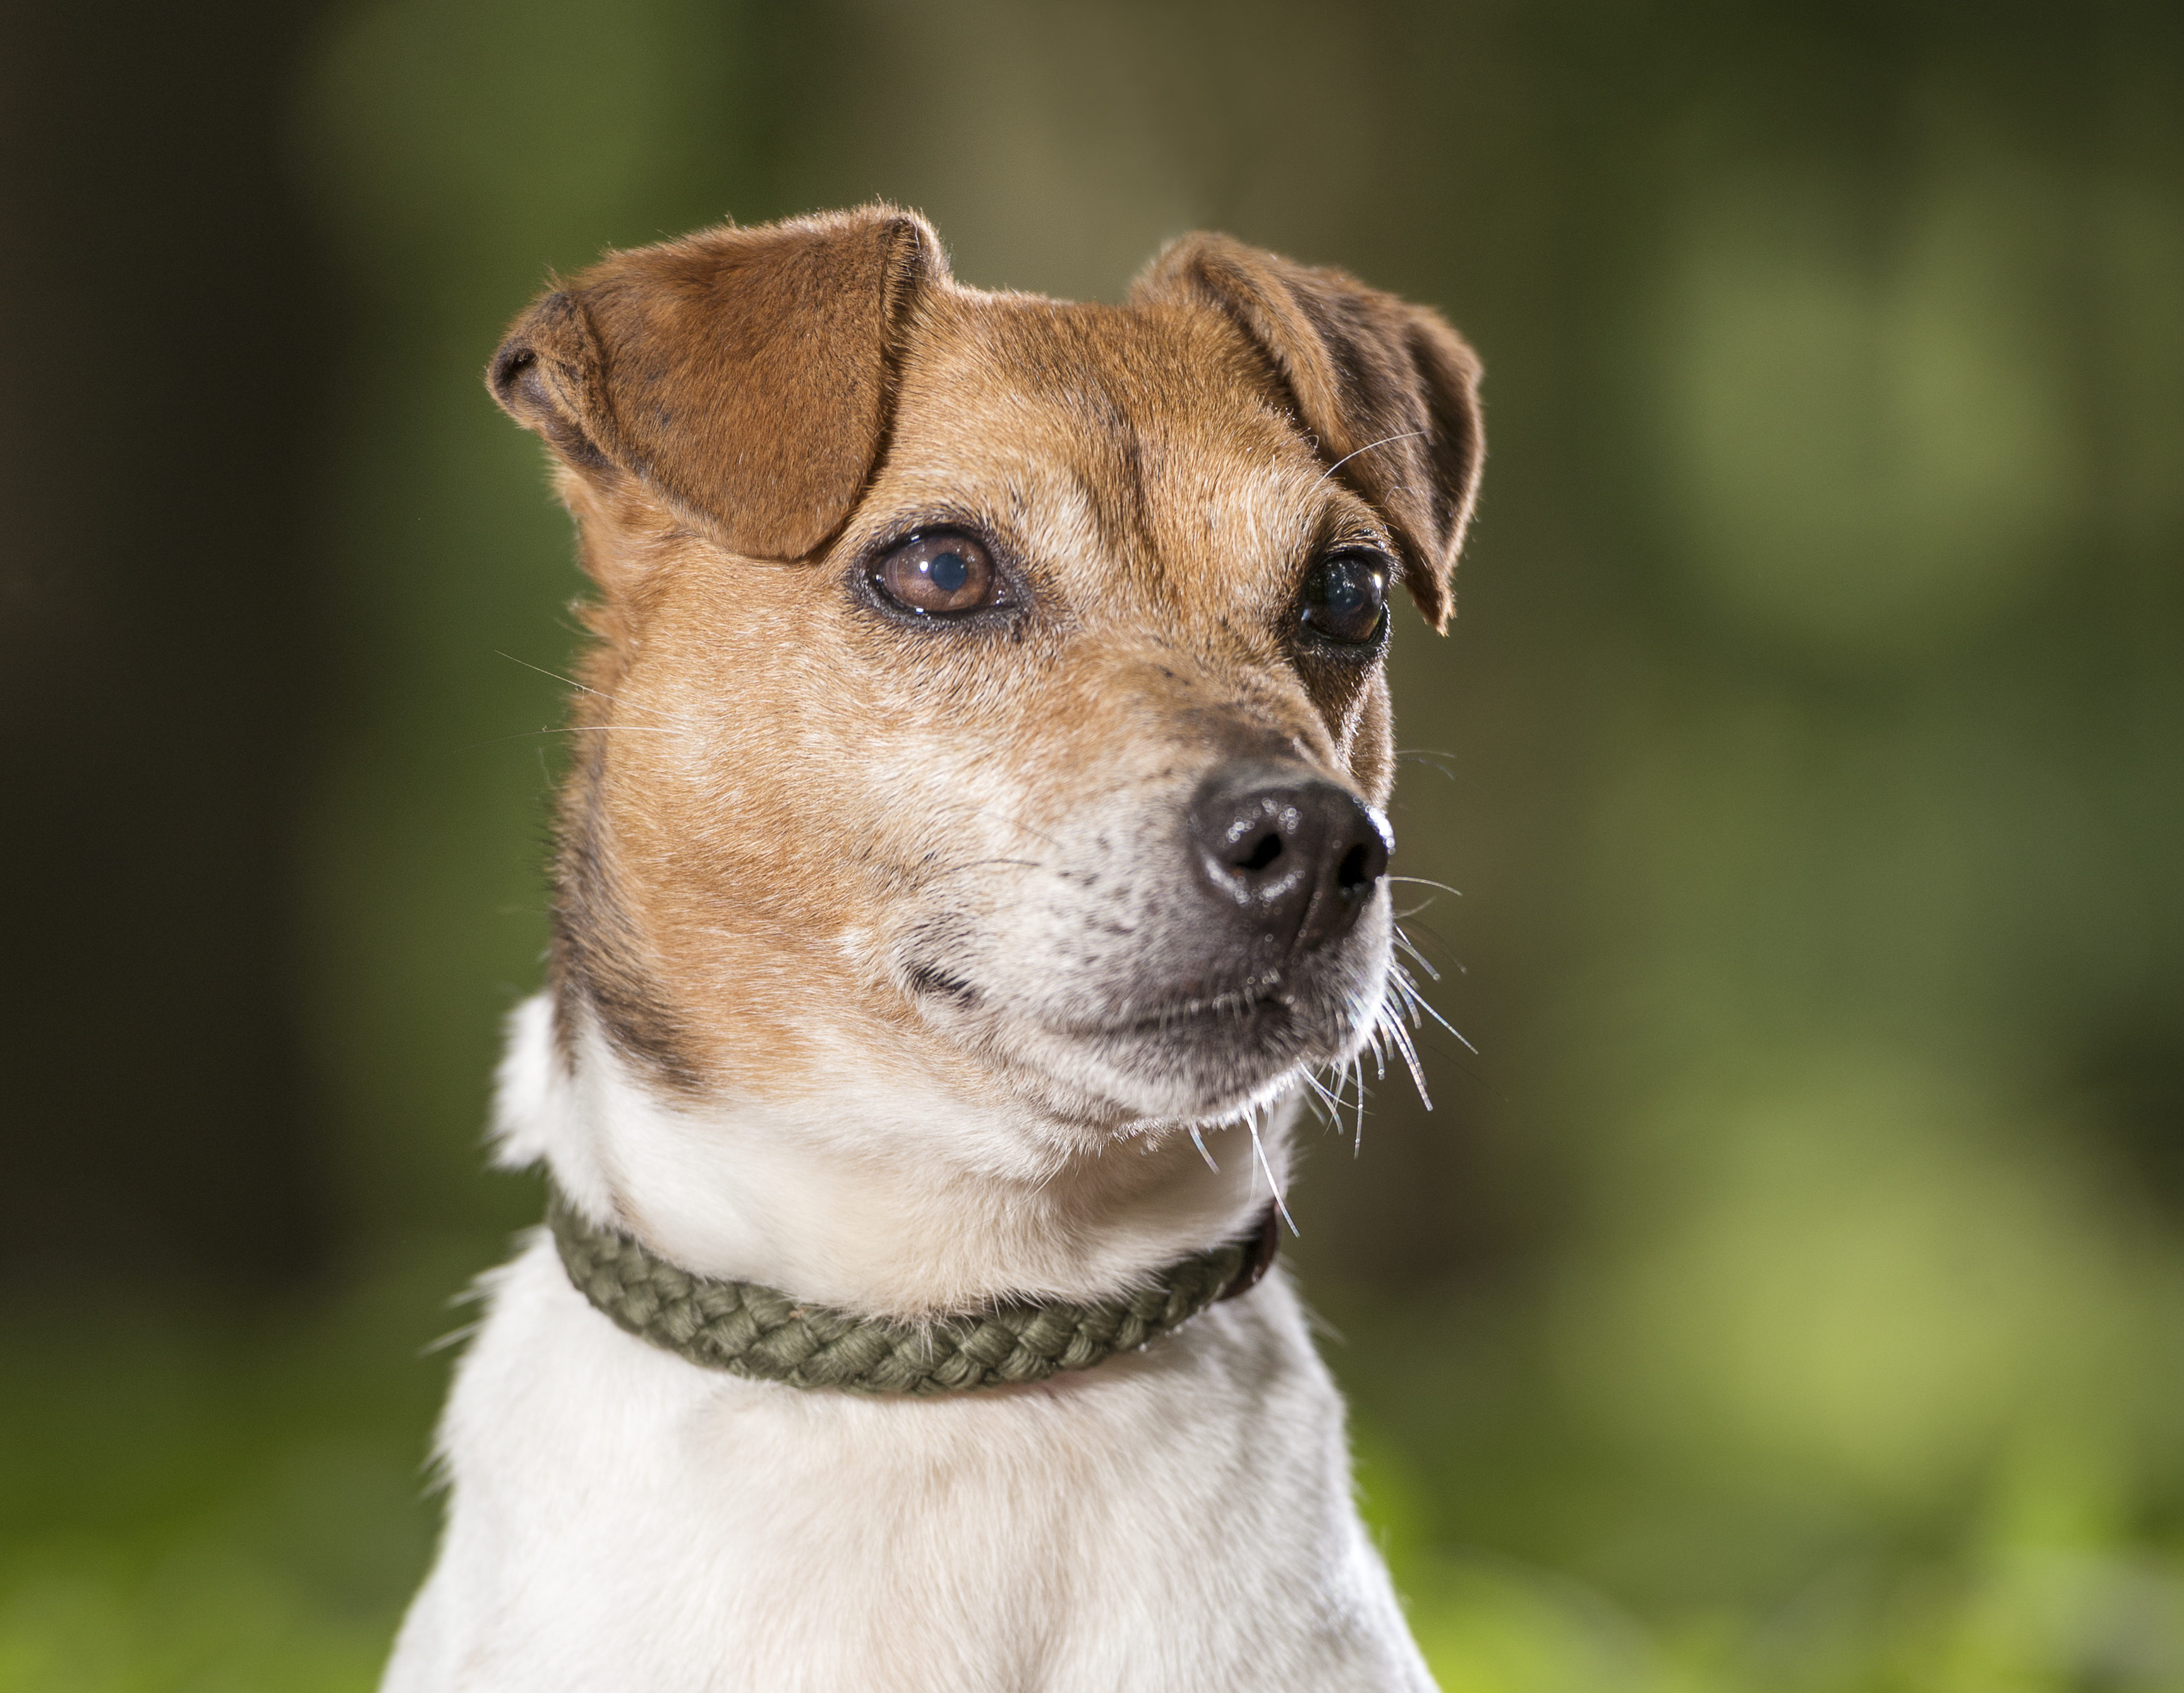 Sunshine 57 year old female Jack Russell Terrier dog for adoption